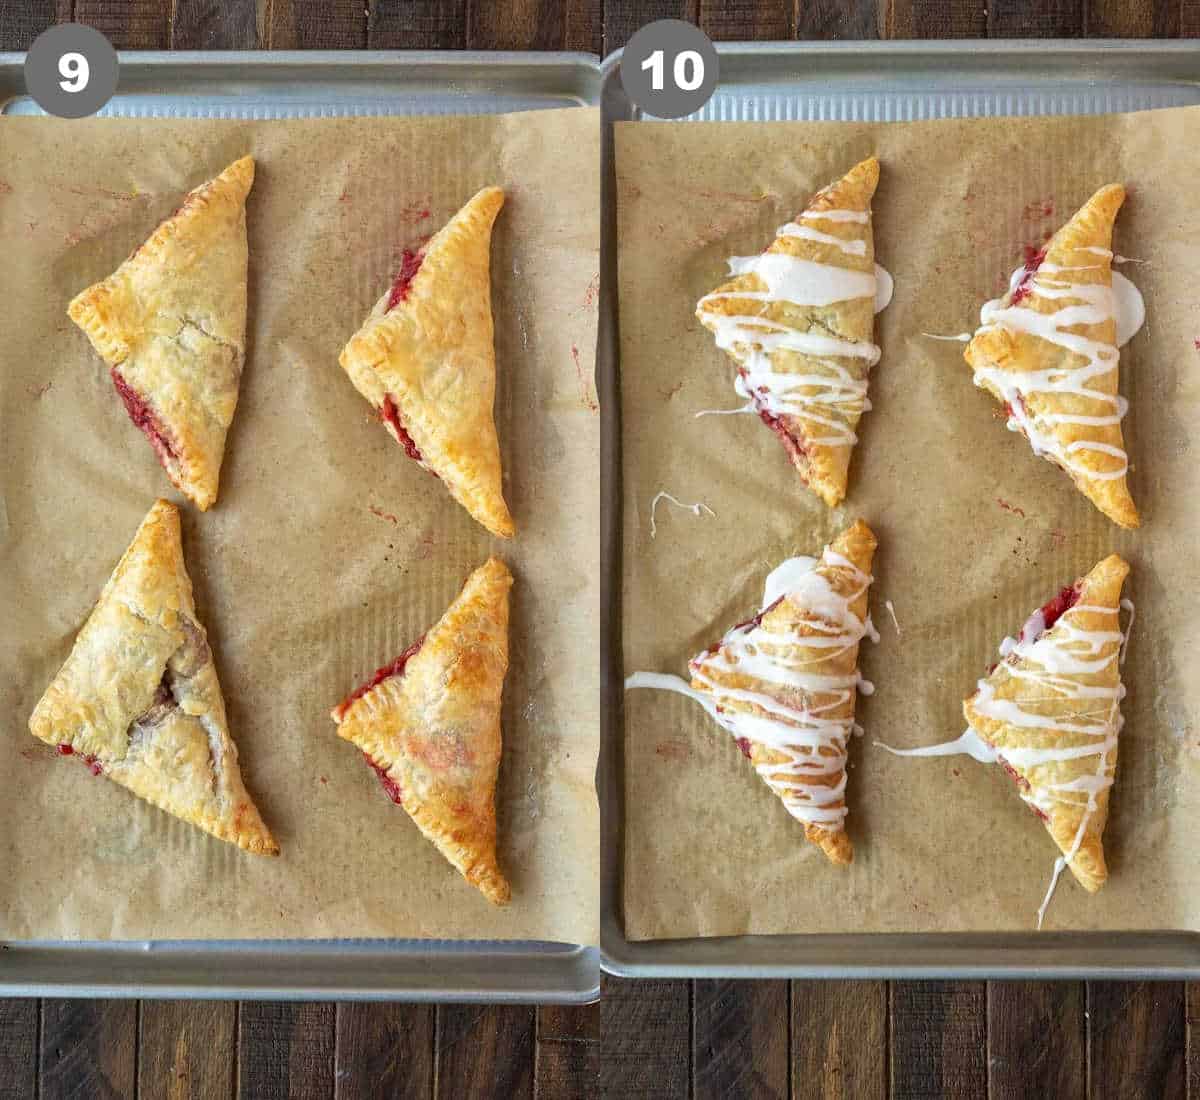 Strawberry turnover baked on a baking sheet then icing drizzled over the top.